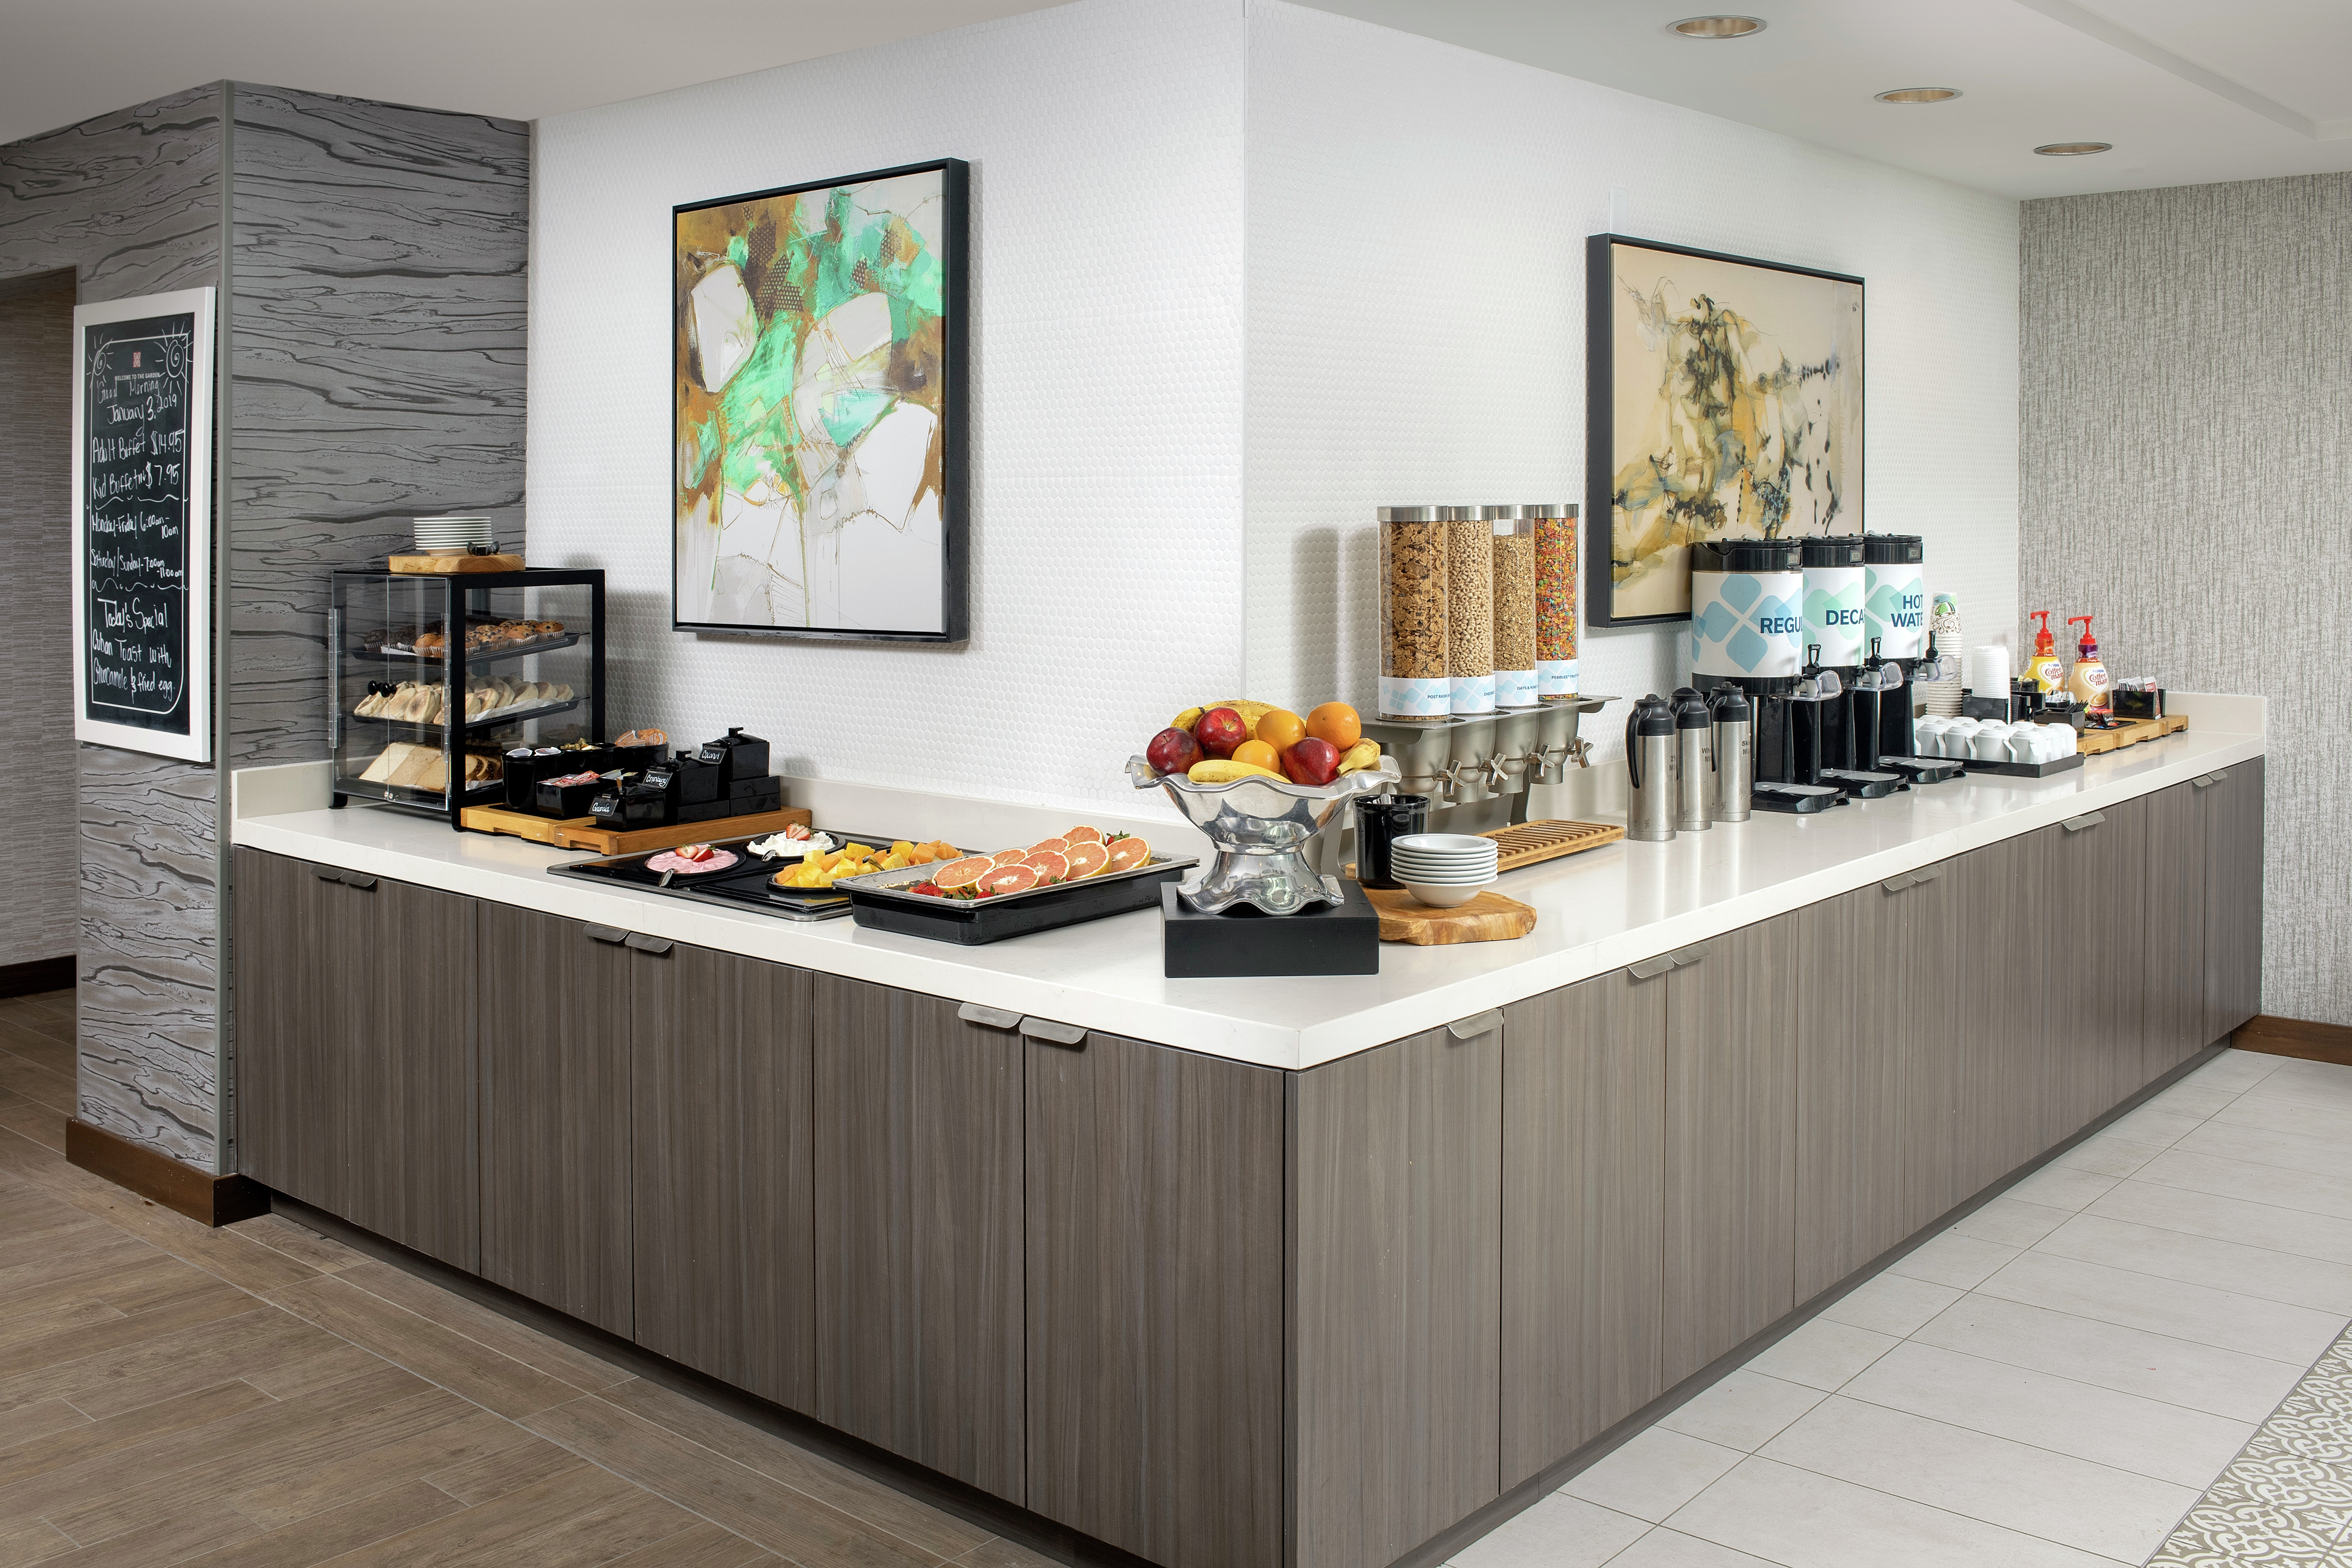 Breakfast Bar Area with Fresh Fruits and Breads